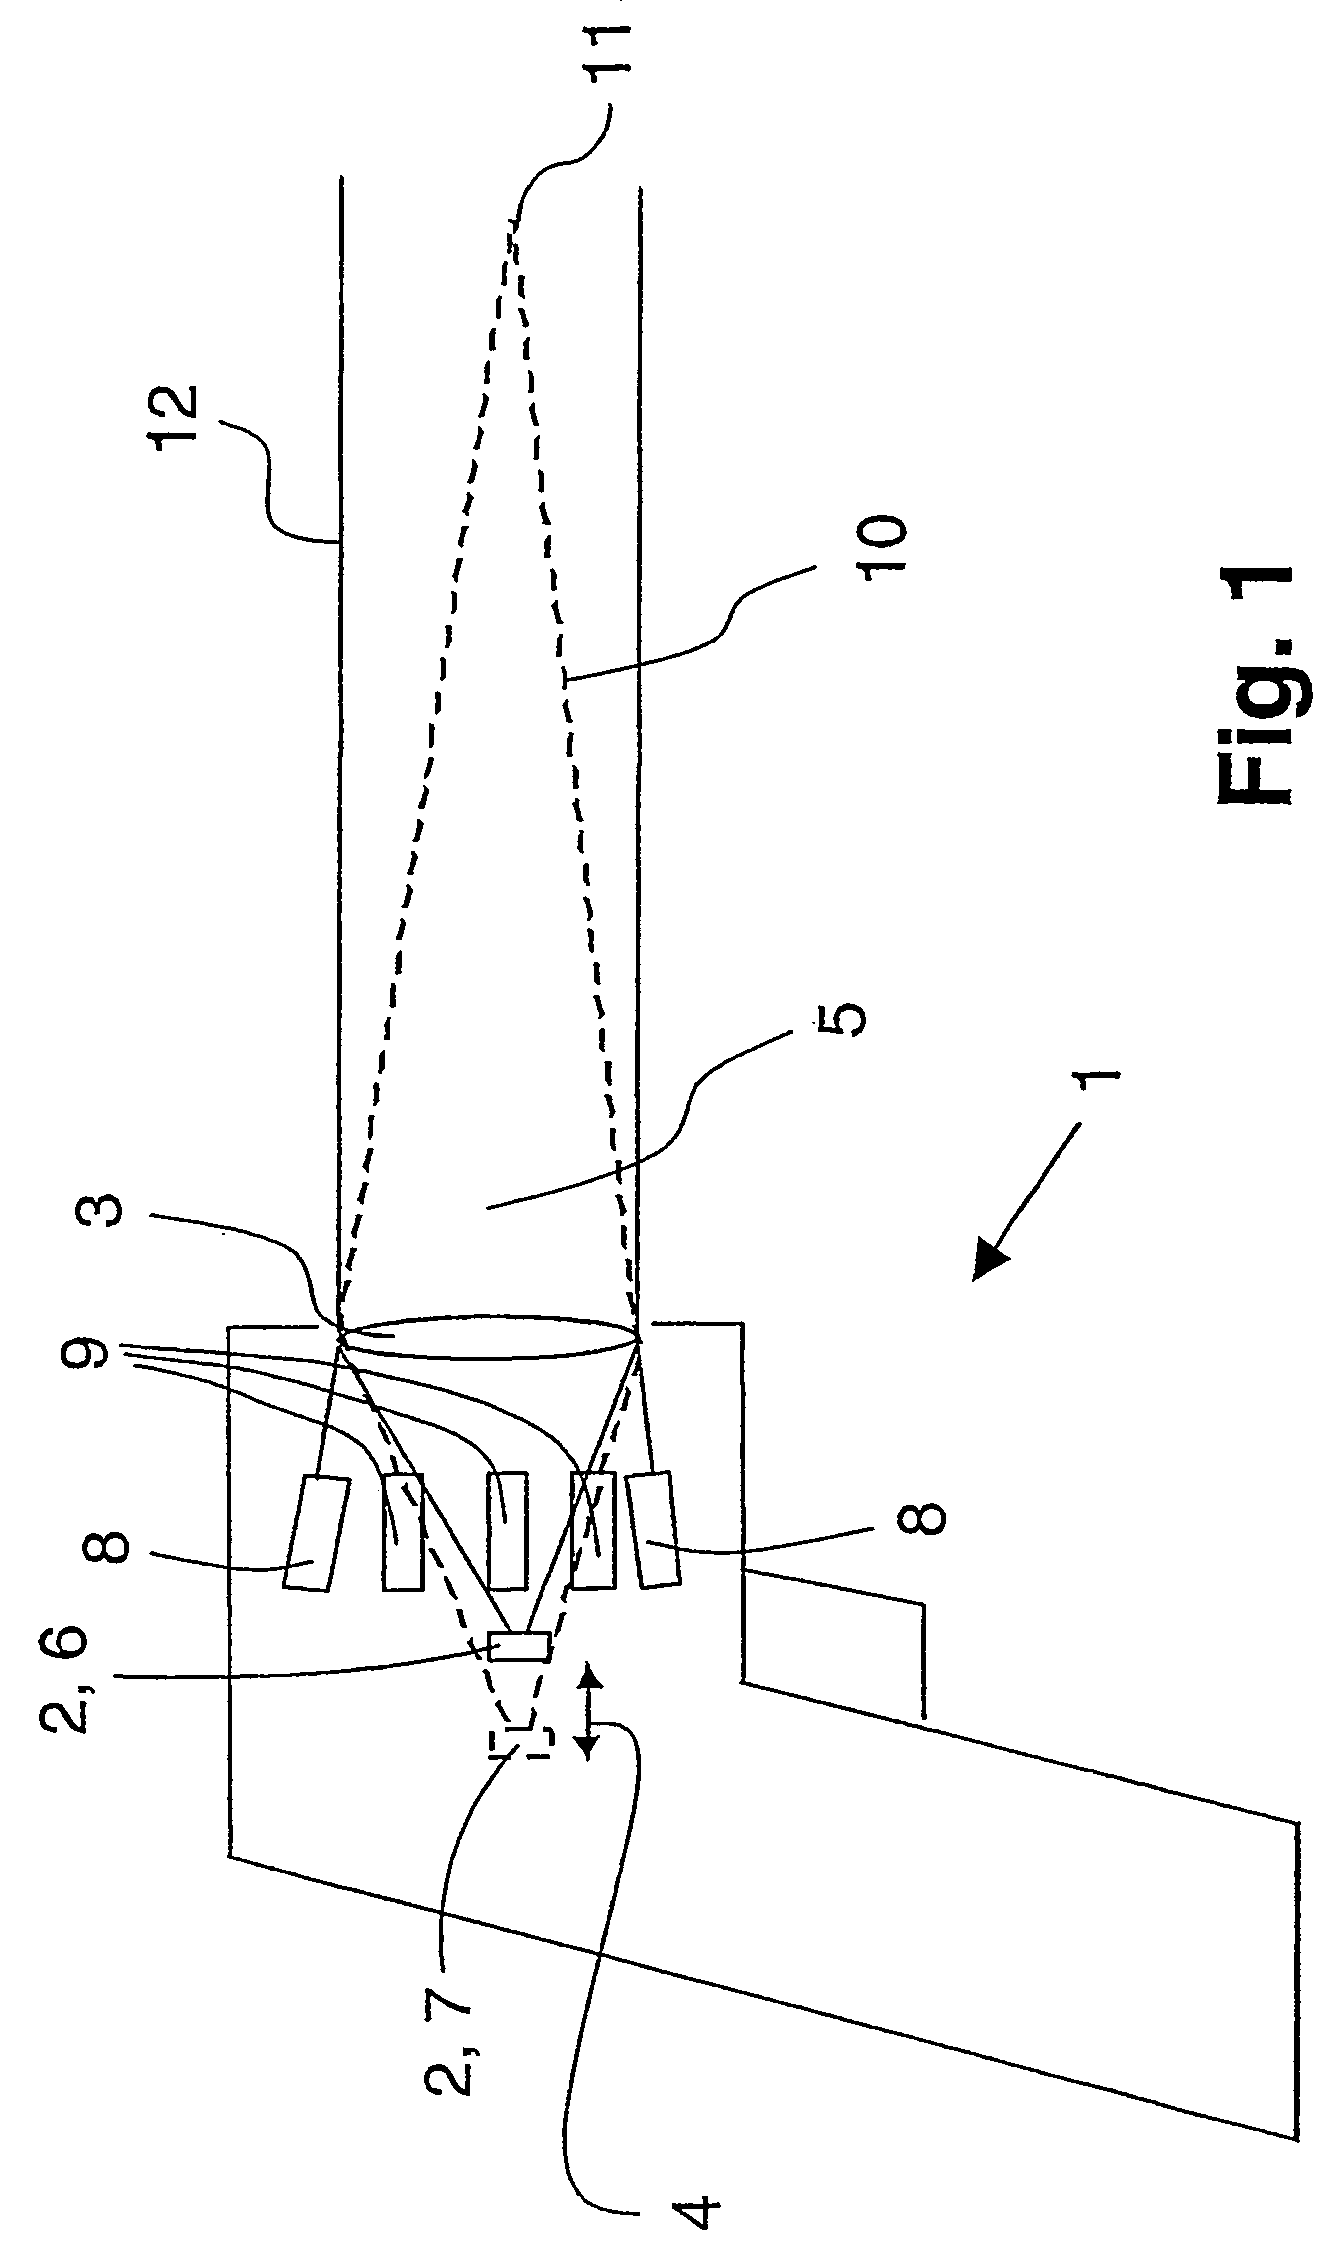 Device for contact-free measurement of temperature